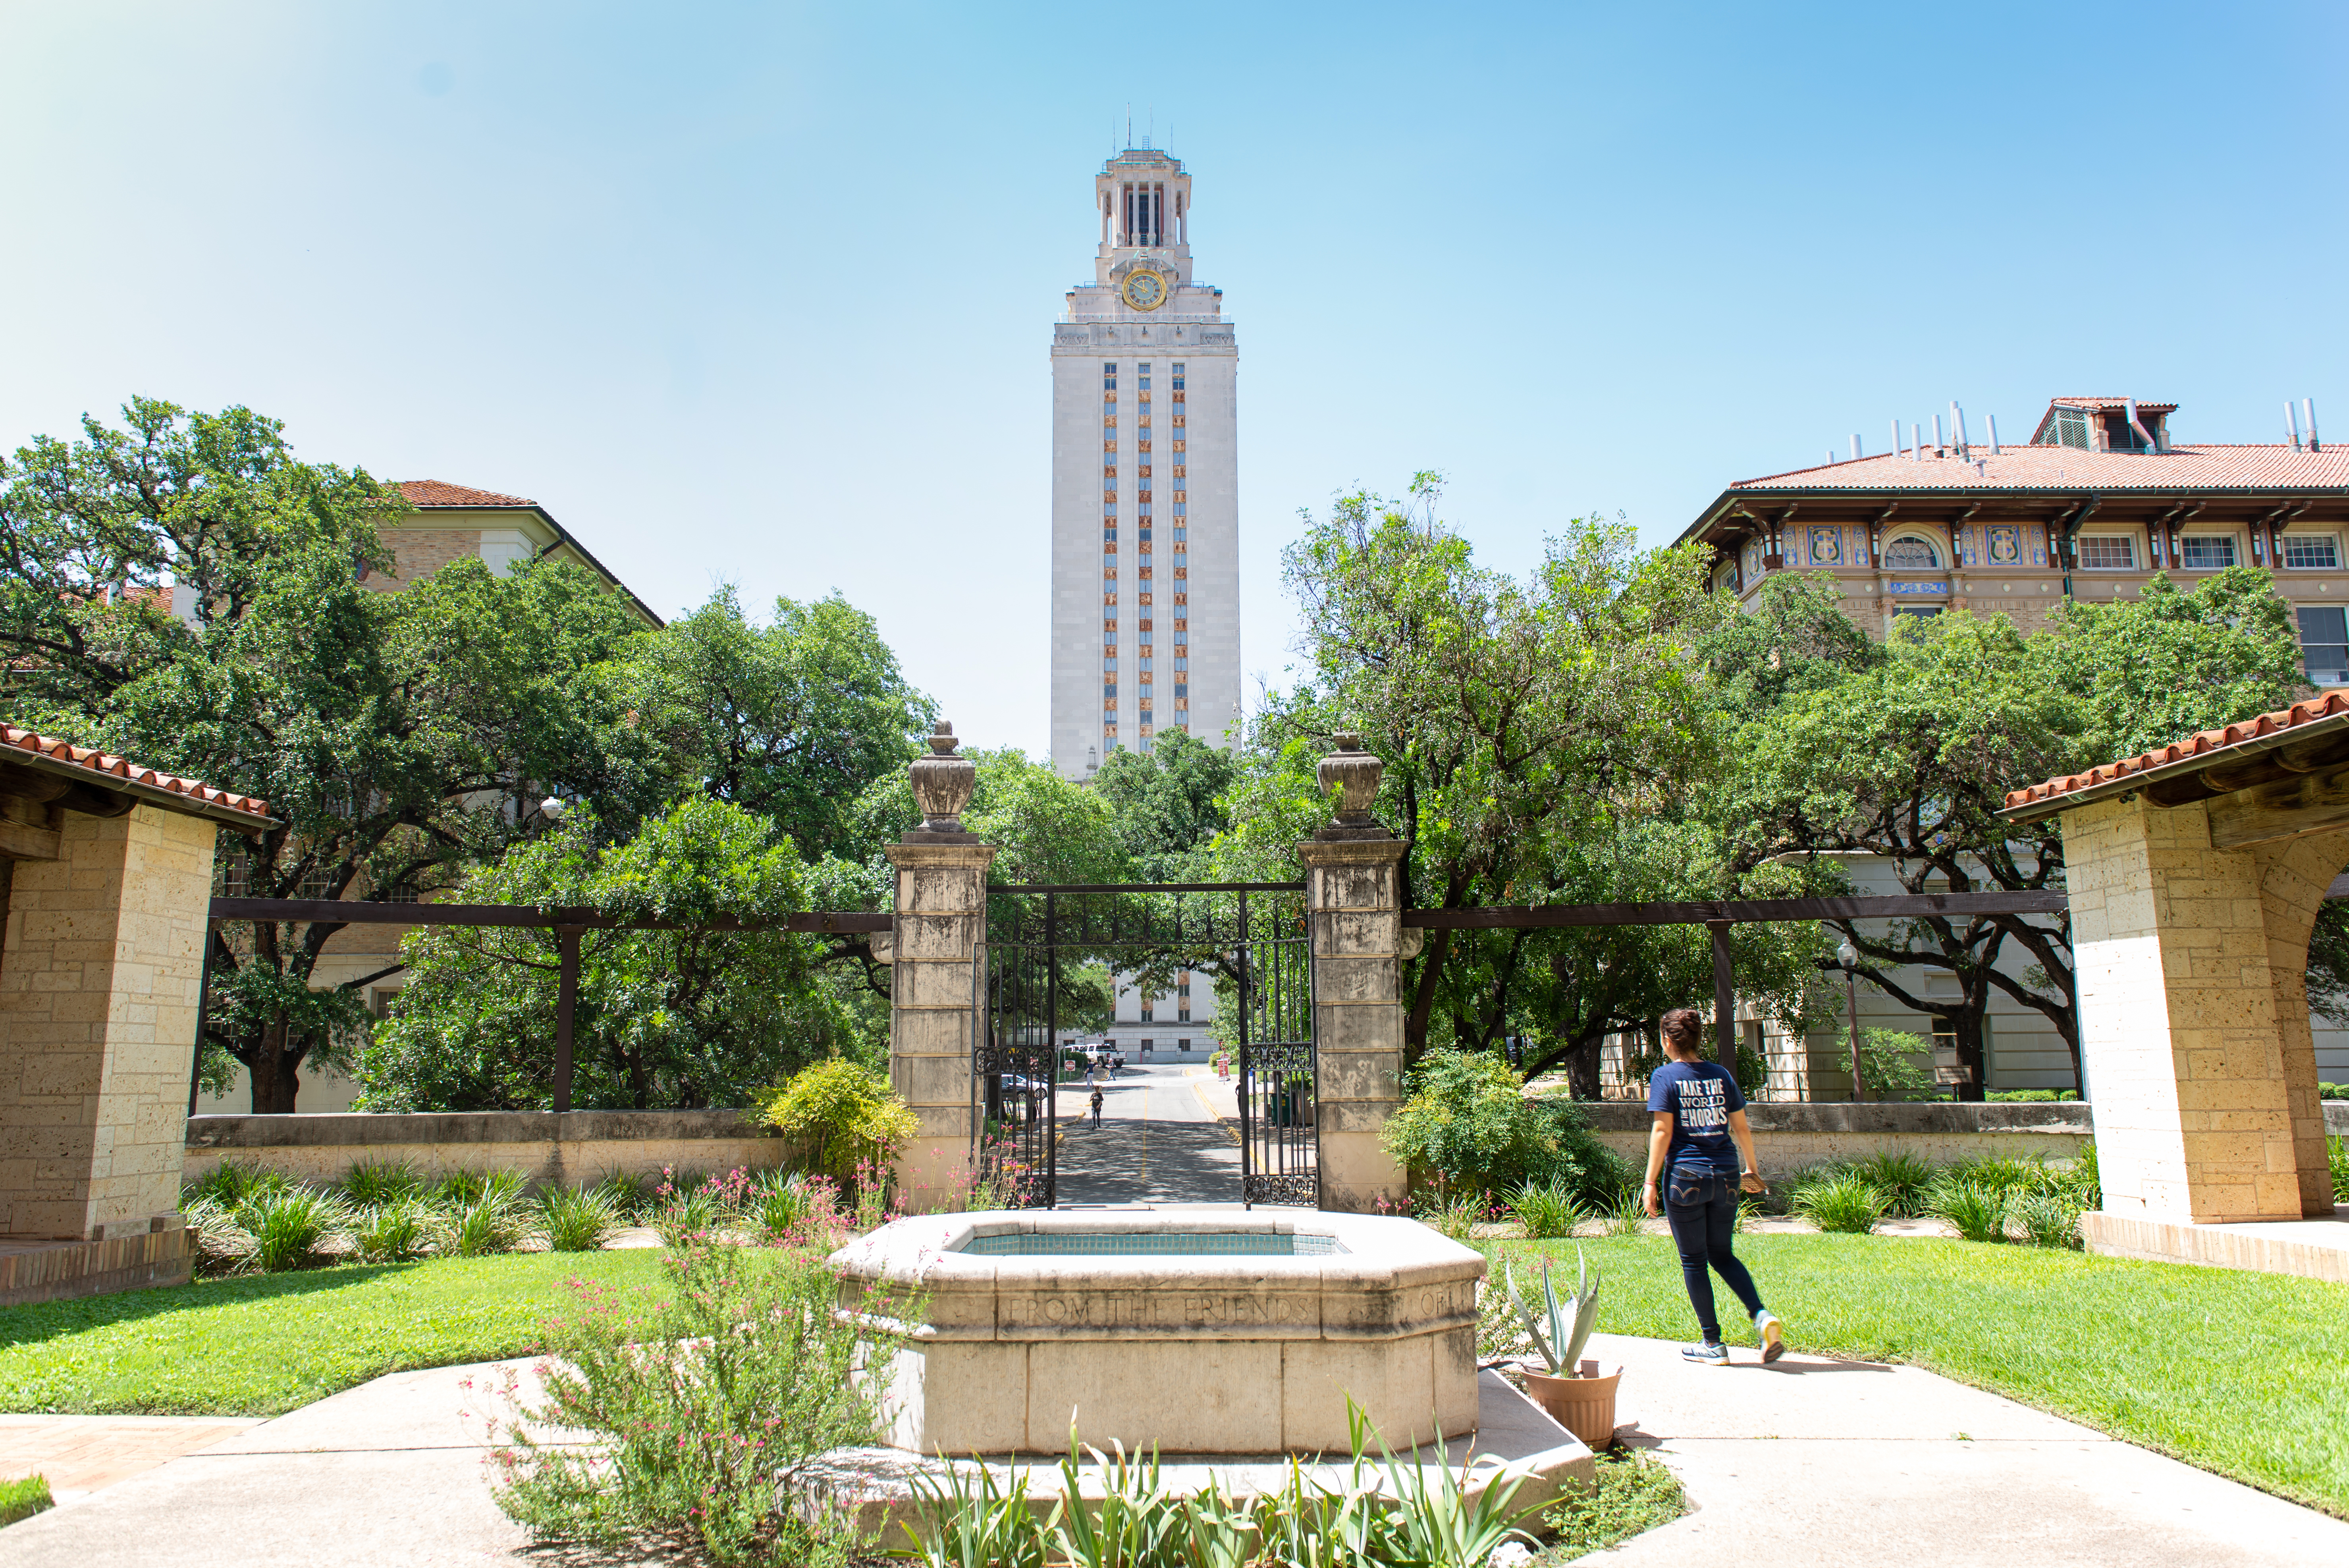 Photo of UT Tower from north with the gates of Gearing Hall and a studetn walking in the foreground.